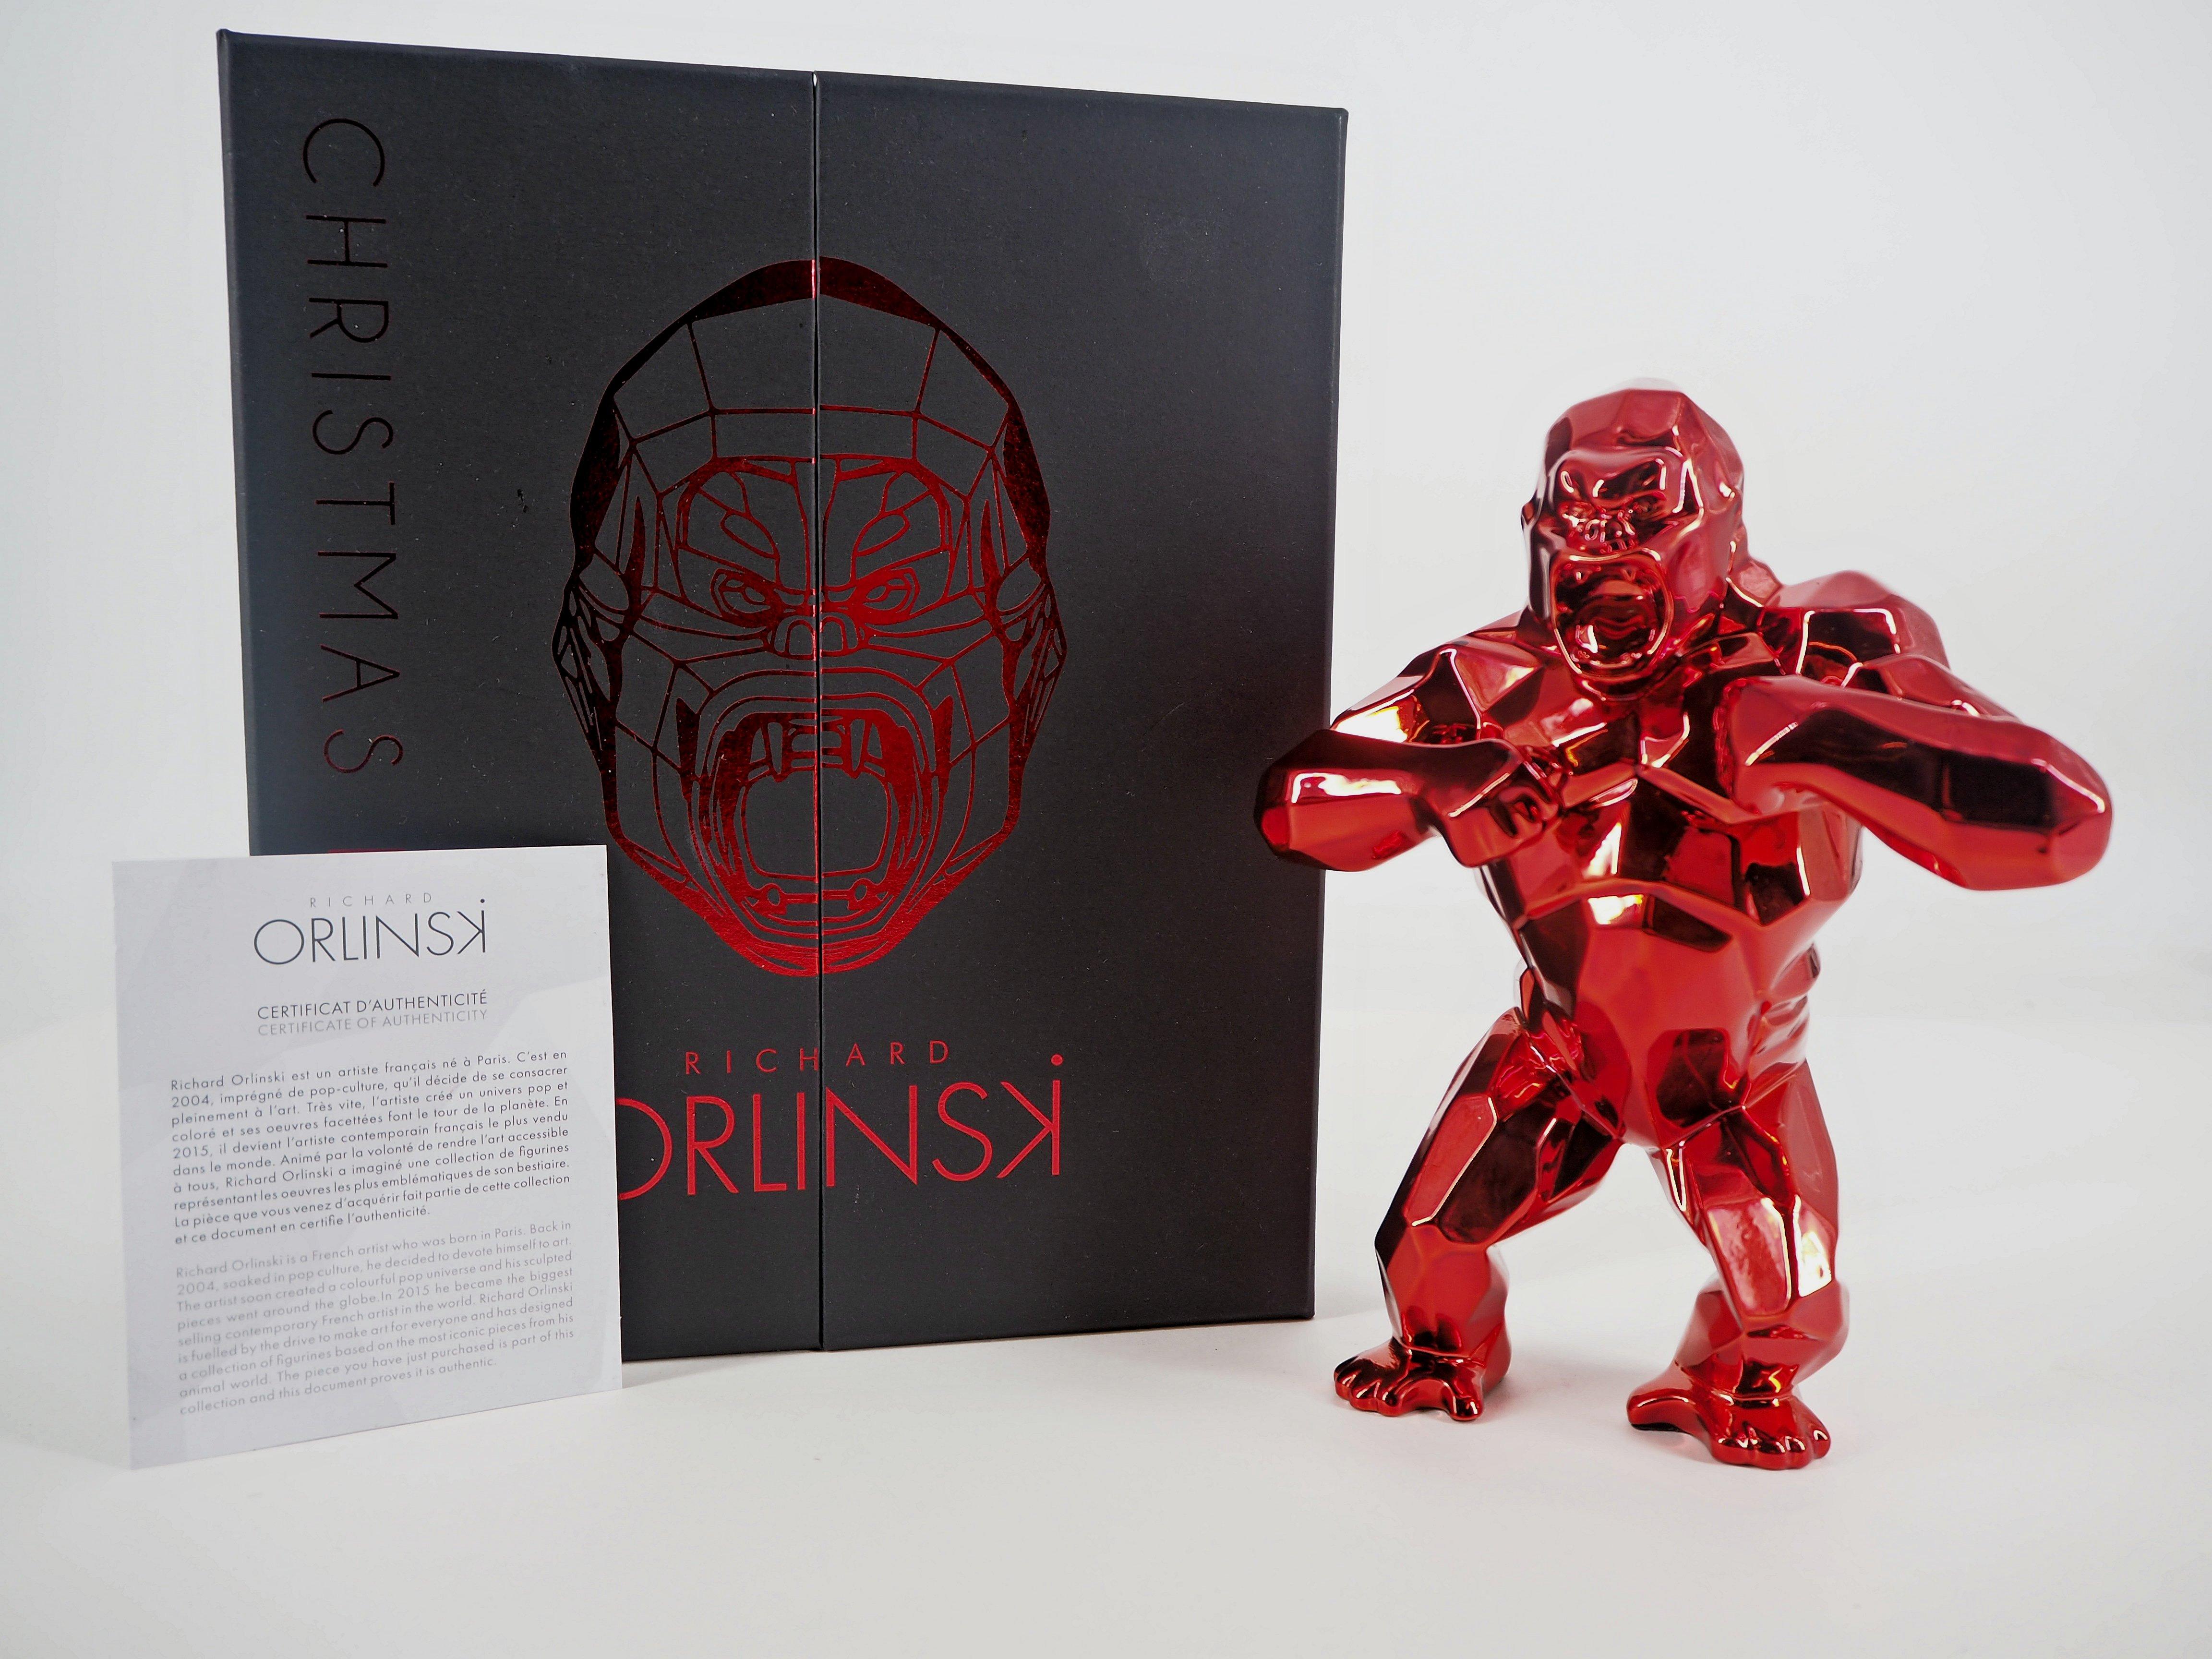 Richard ORLINSKI
Kong Christmas (Red edition)

Sculpture in resin
Red Edition
About 19 x 13 cm (c. 7.4 x 5.1 in)
Presented in original box with certificate

Excellent condition